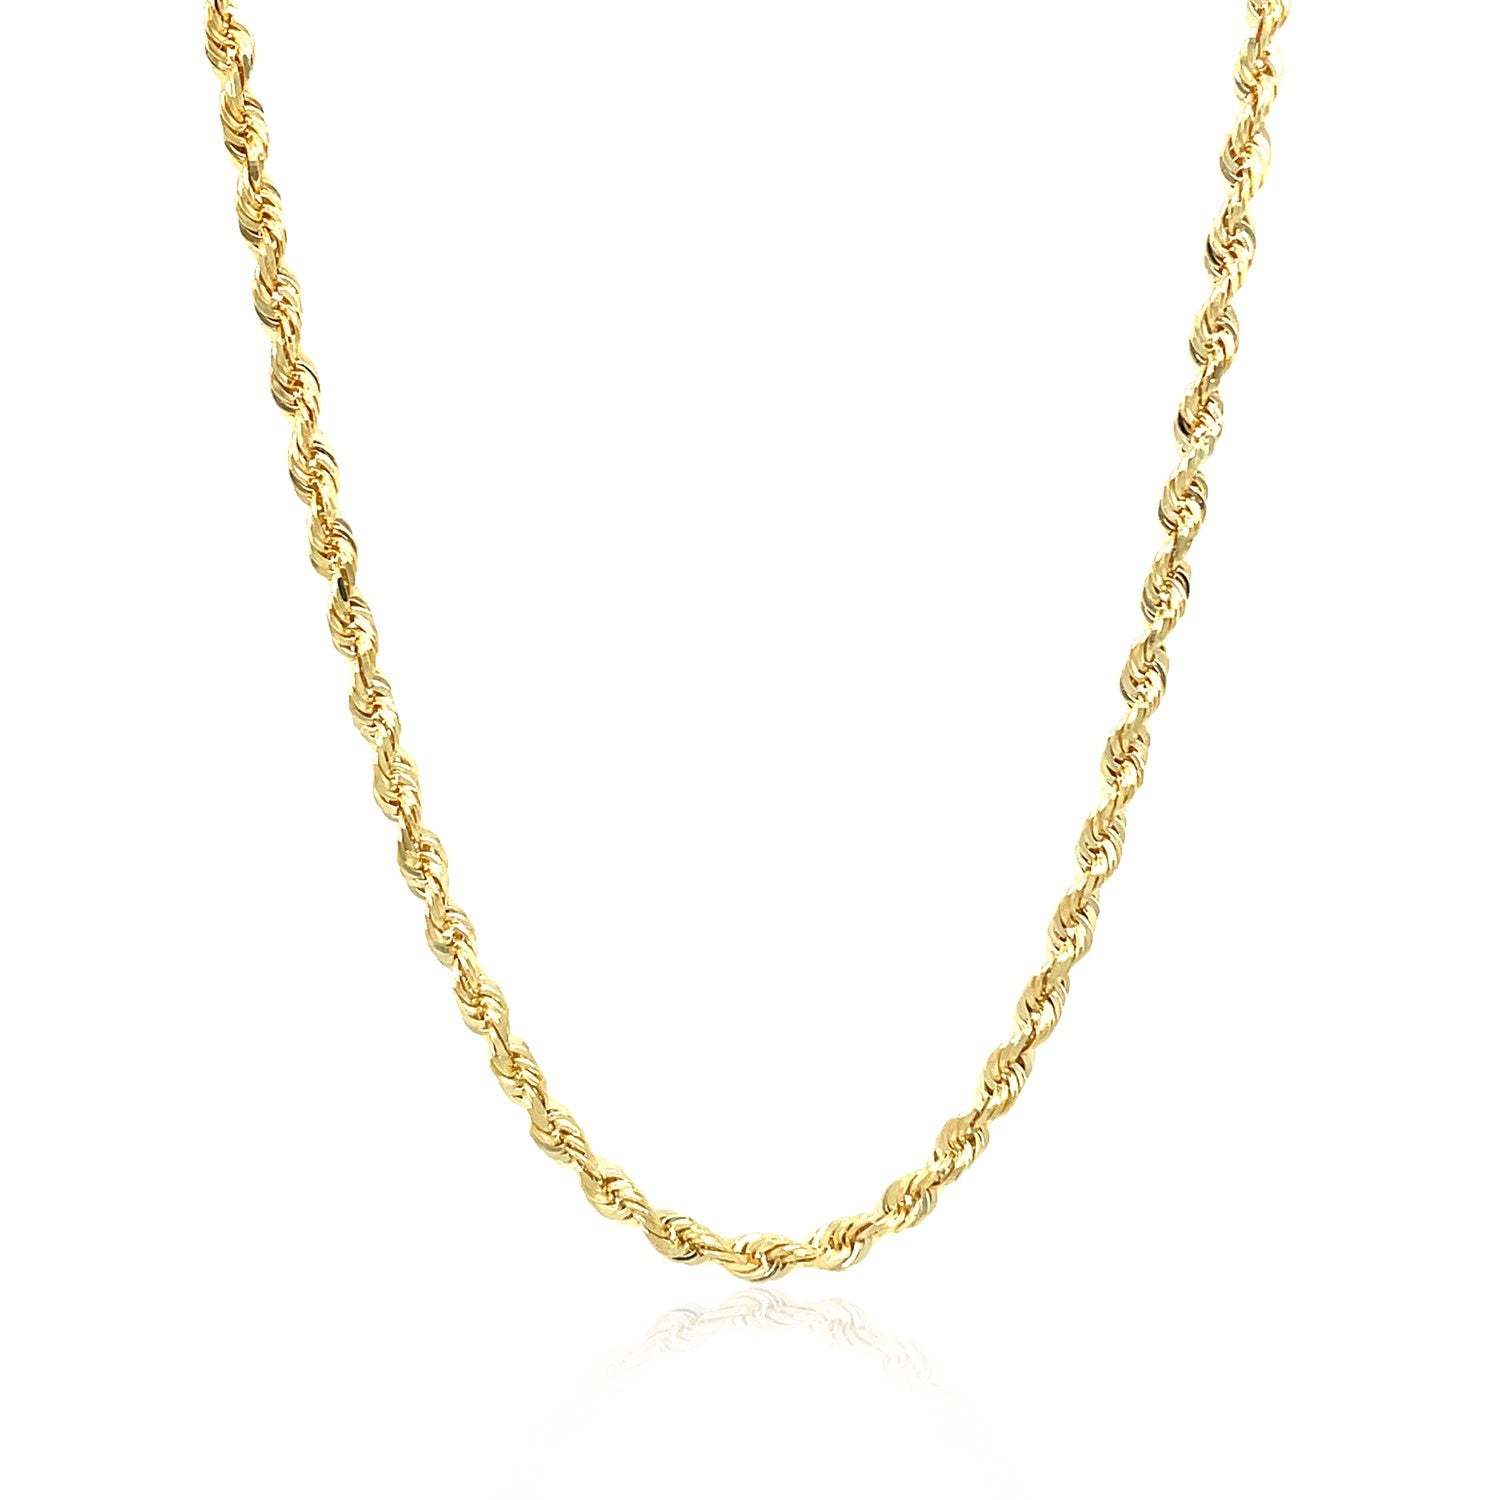 10k Yellow Gold Solid Diamond Cut Rope Chain (2.75 mm)